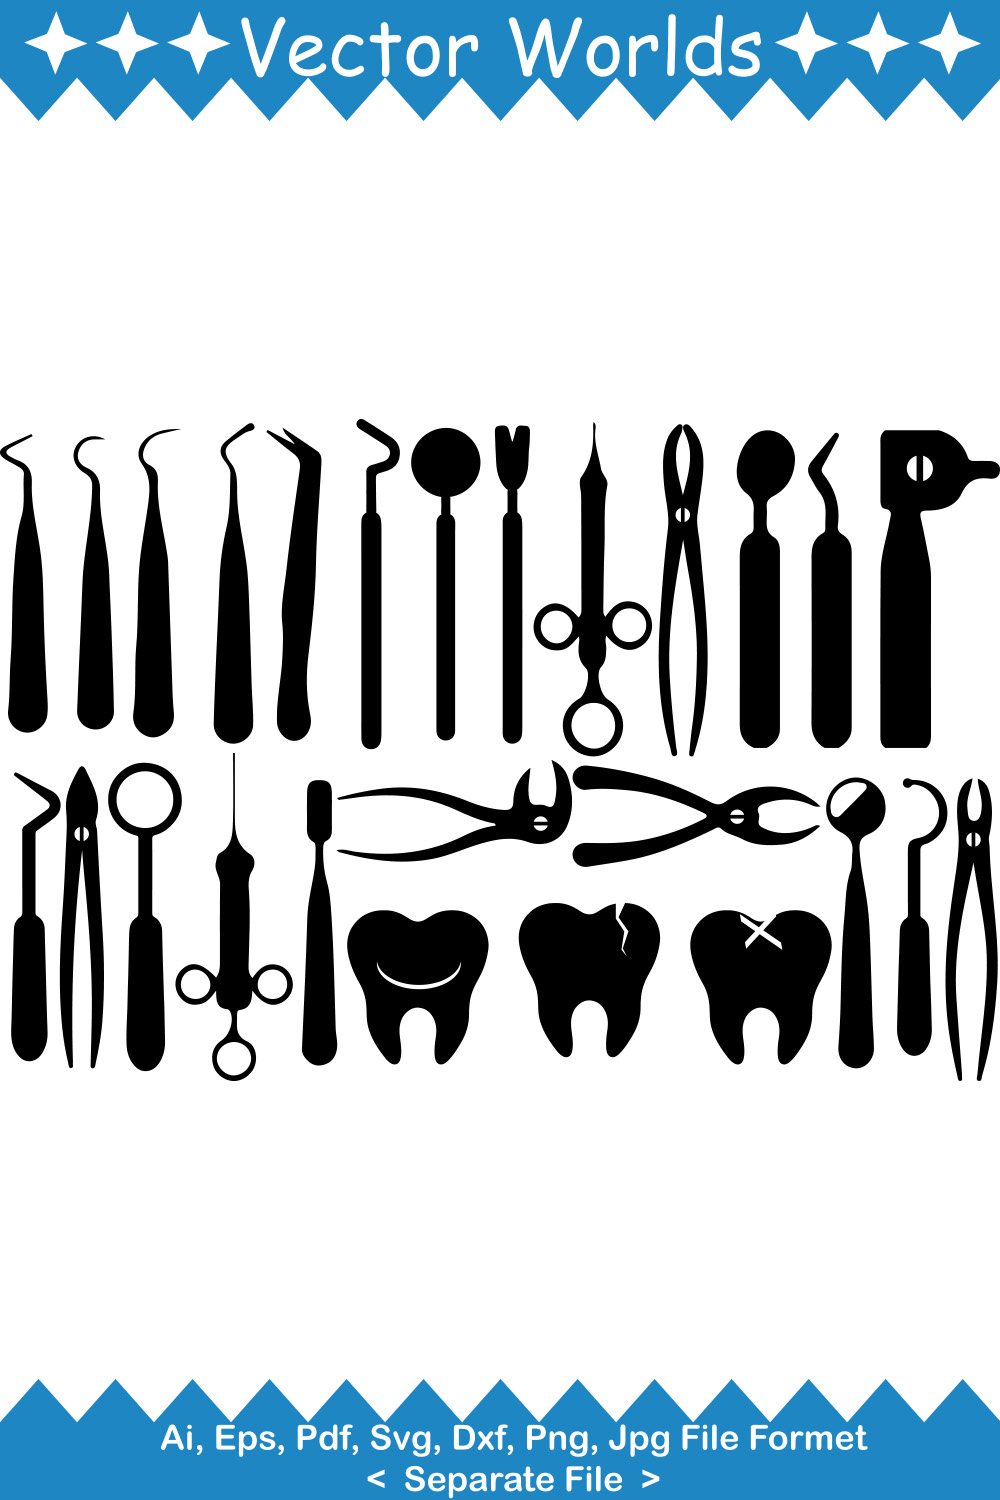 A selection of unique images of silhouettes of dentist tools